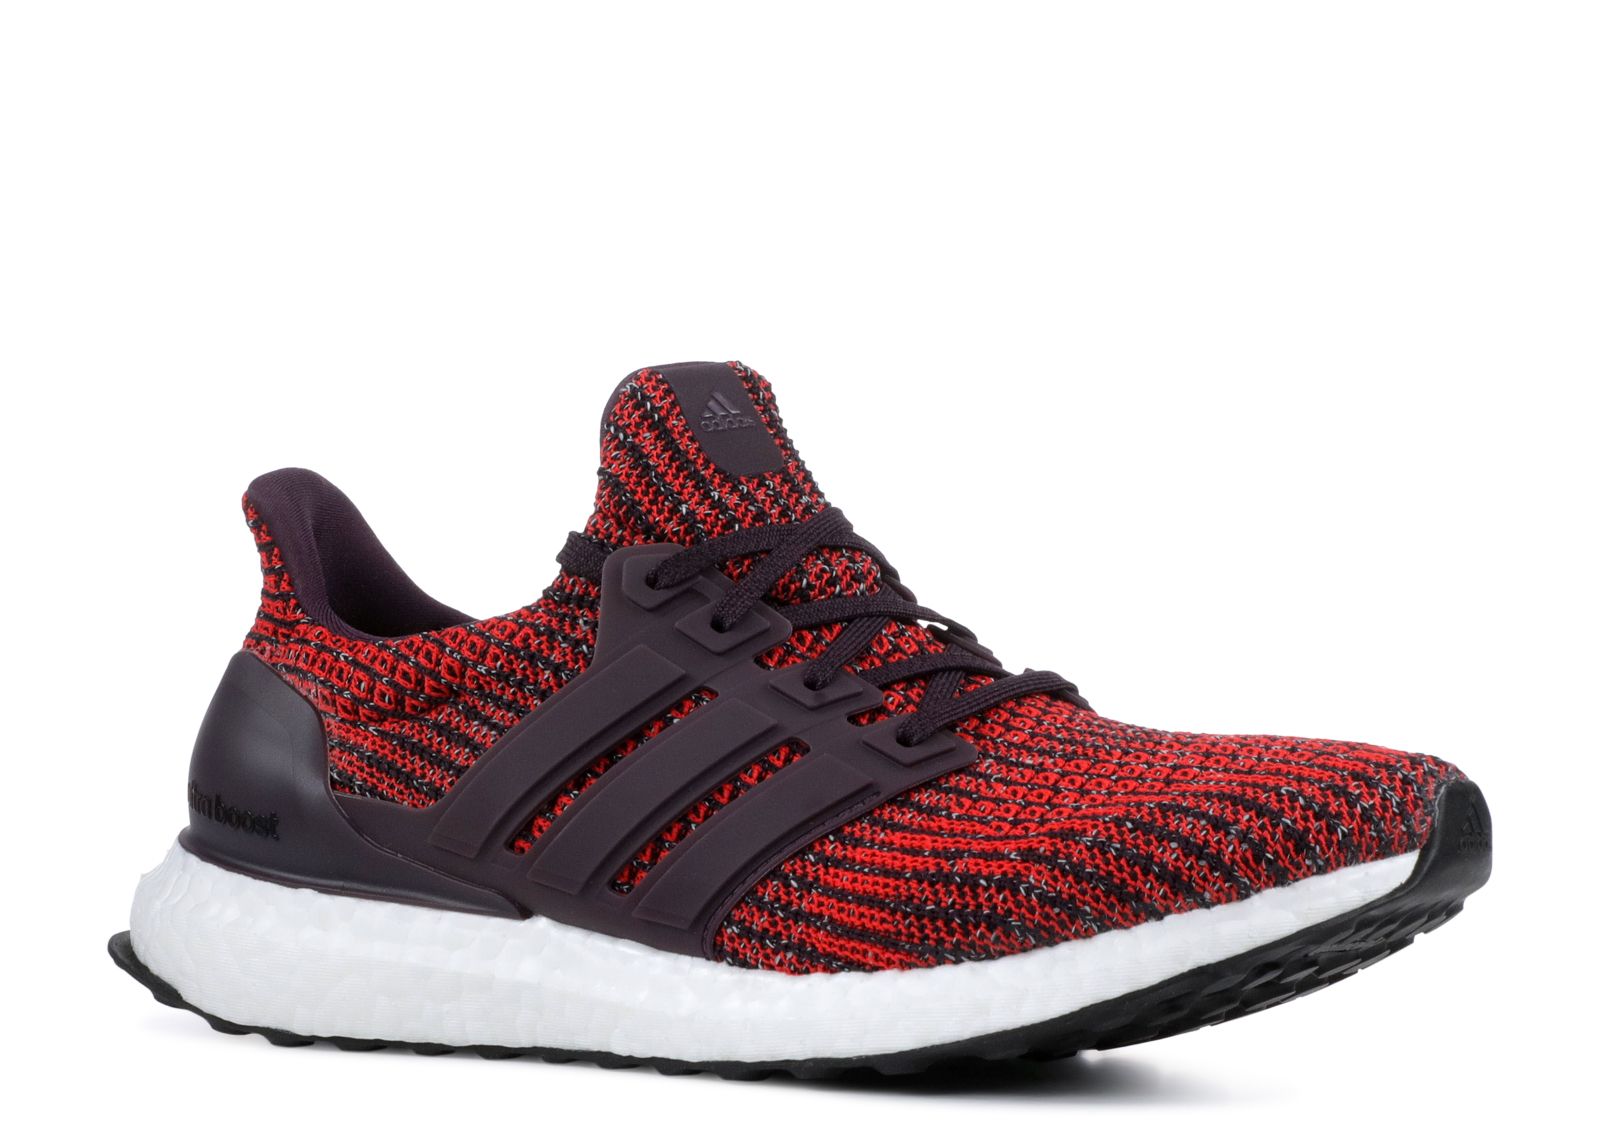 UltraBoost 4.0 'Noble Red' - Adidas 